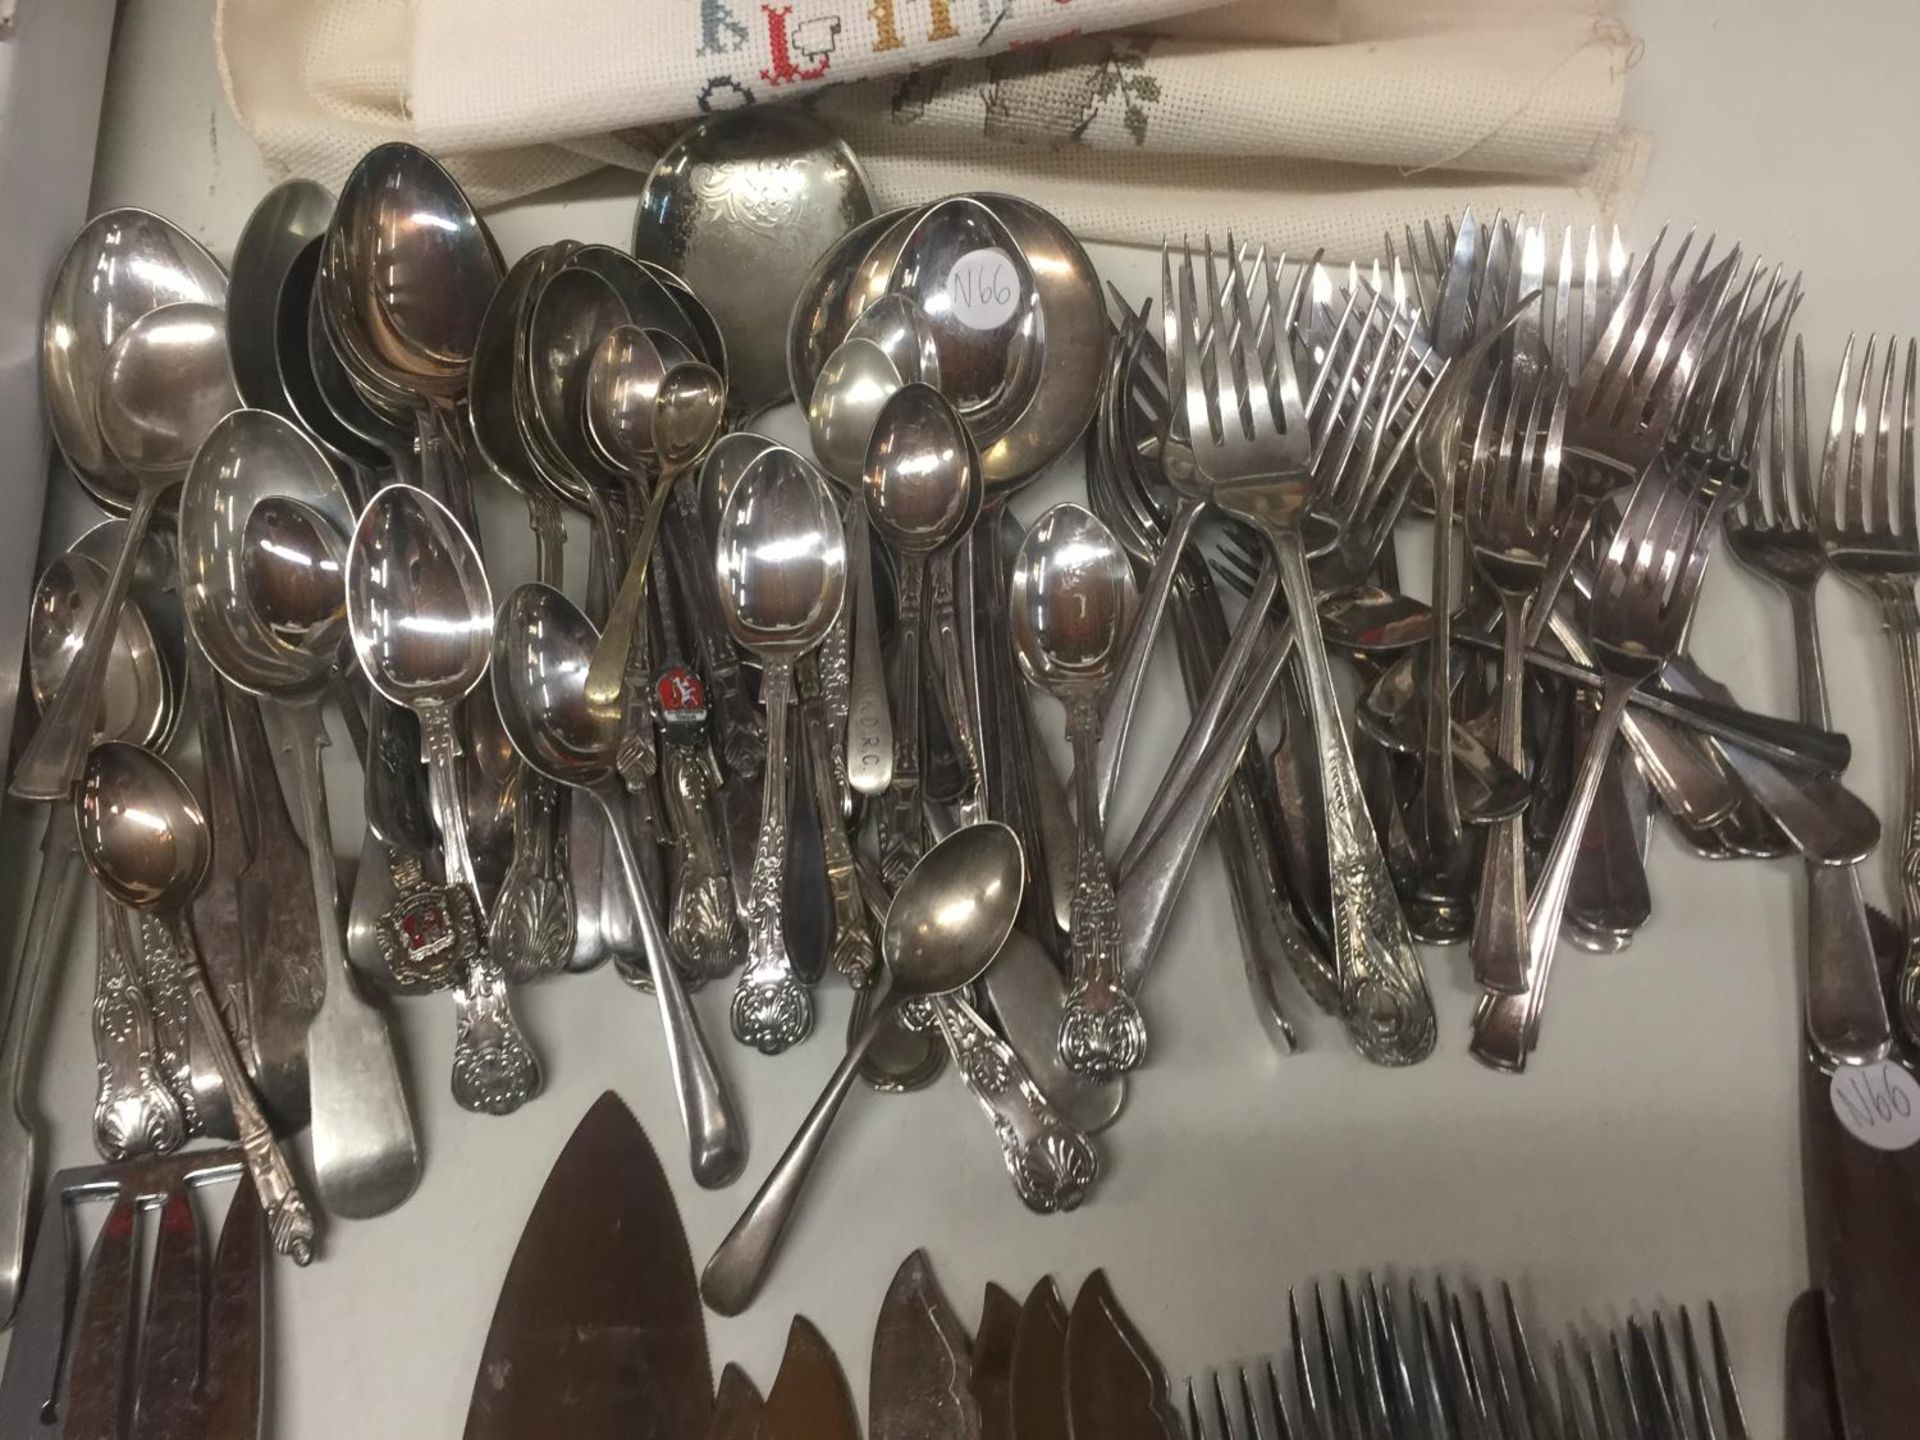 A LARGE AMOUNT OF FLATWARE TO INCLUDE KNIVES, FORKS, SPOONS, SERVERS, ETC - Image 3 of 4